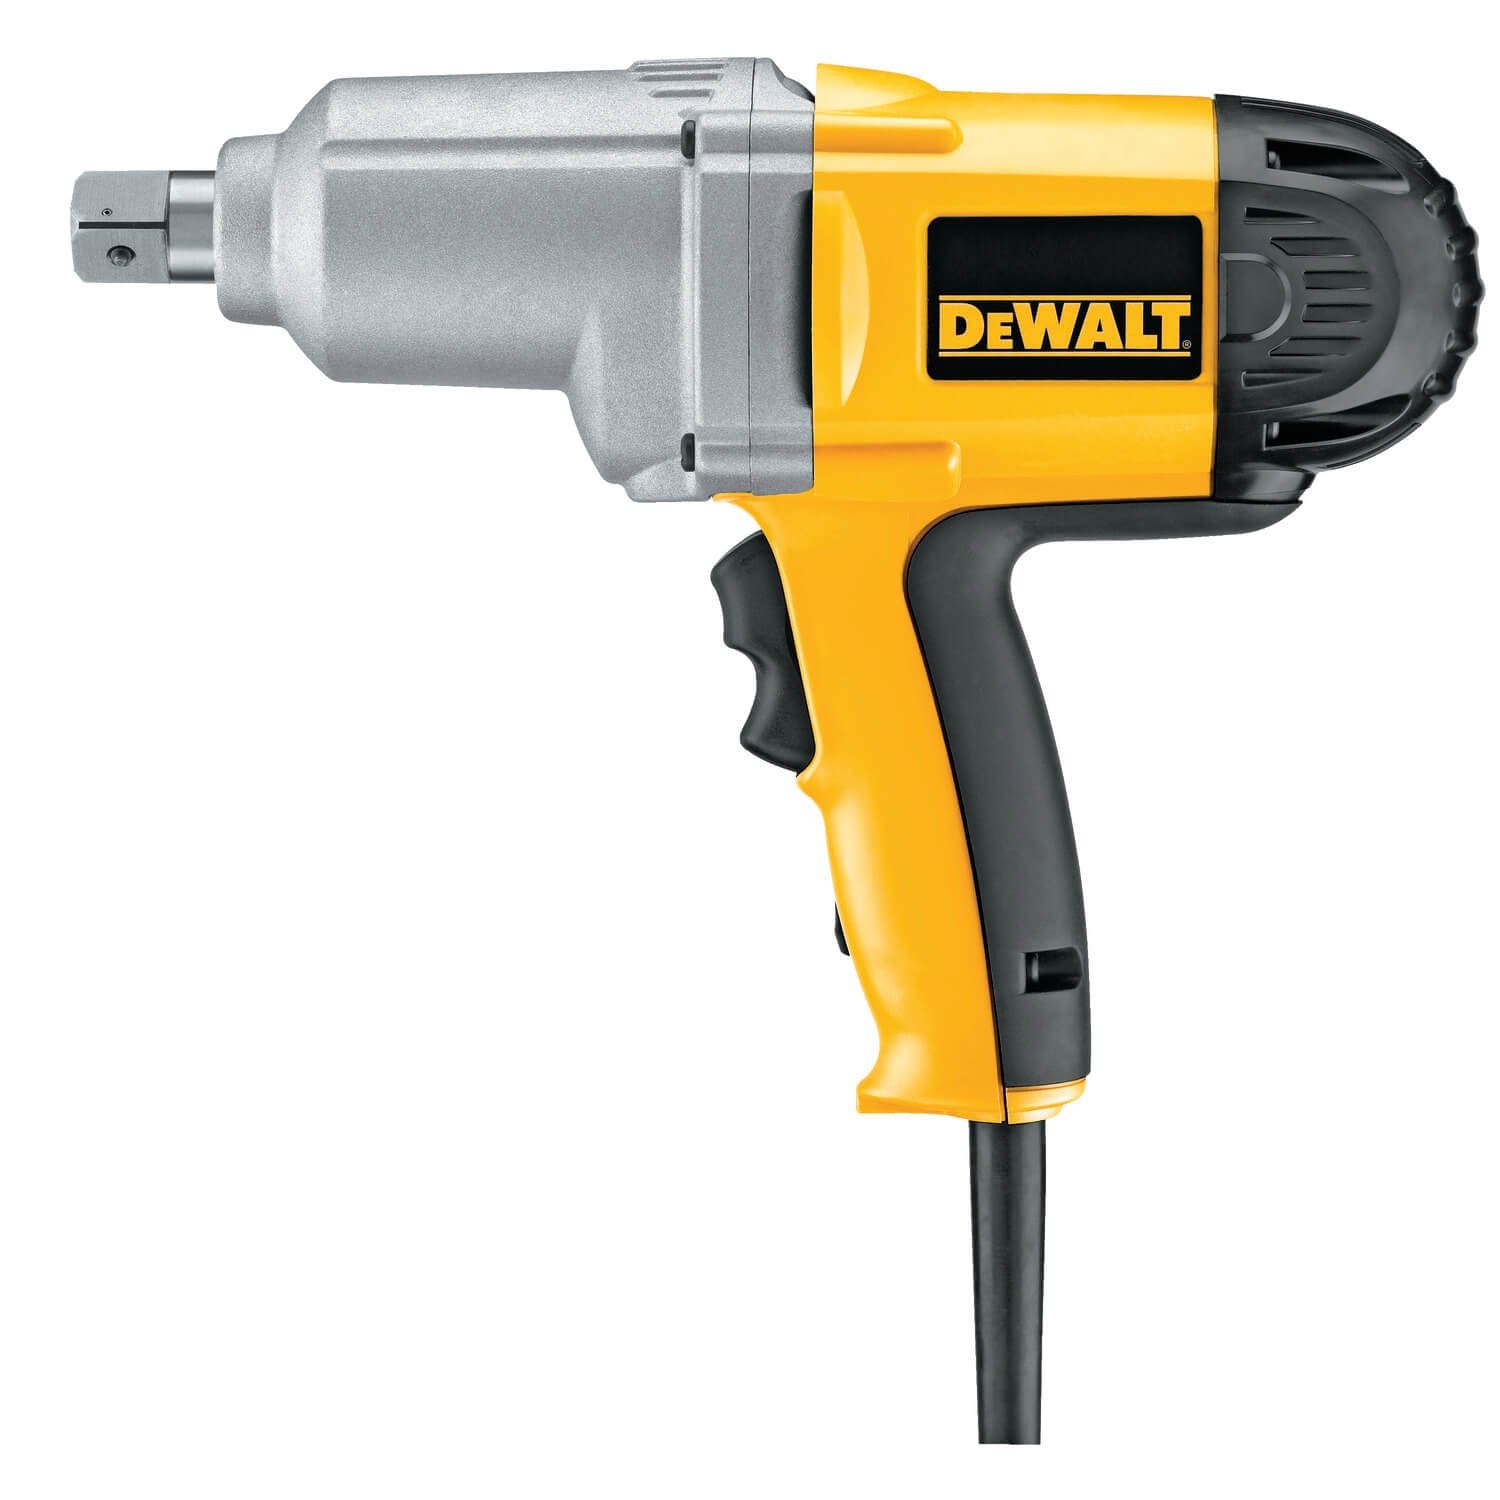 DEWALT DW294 7.5 Amp 3/4-Inch Impact Wrench with Detent Pin Anvil